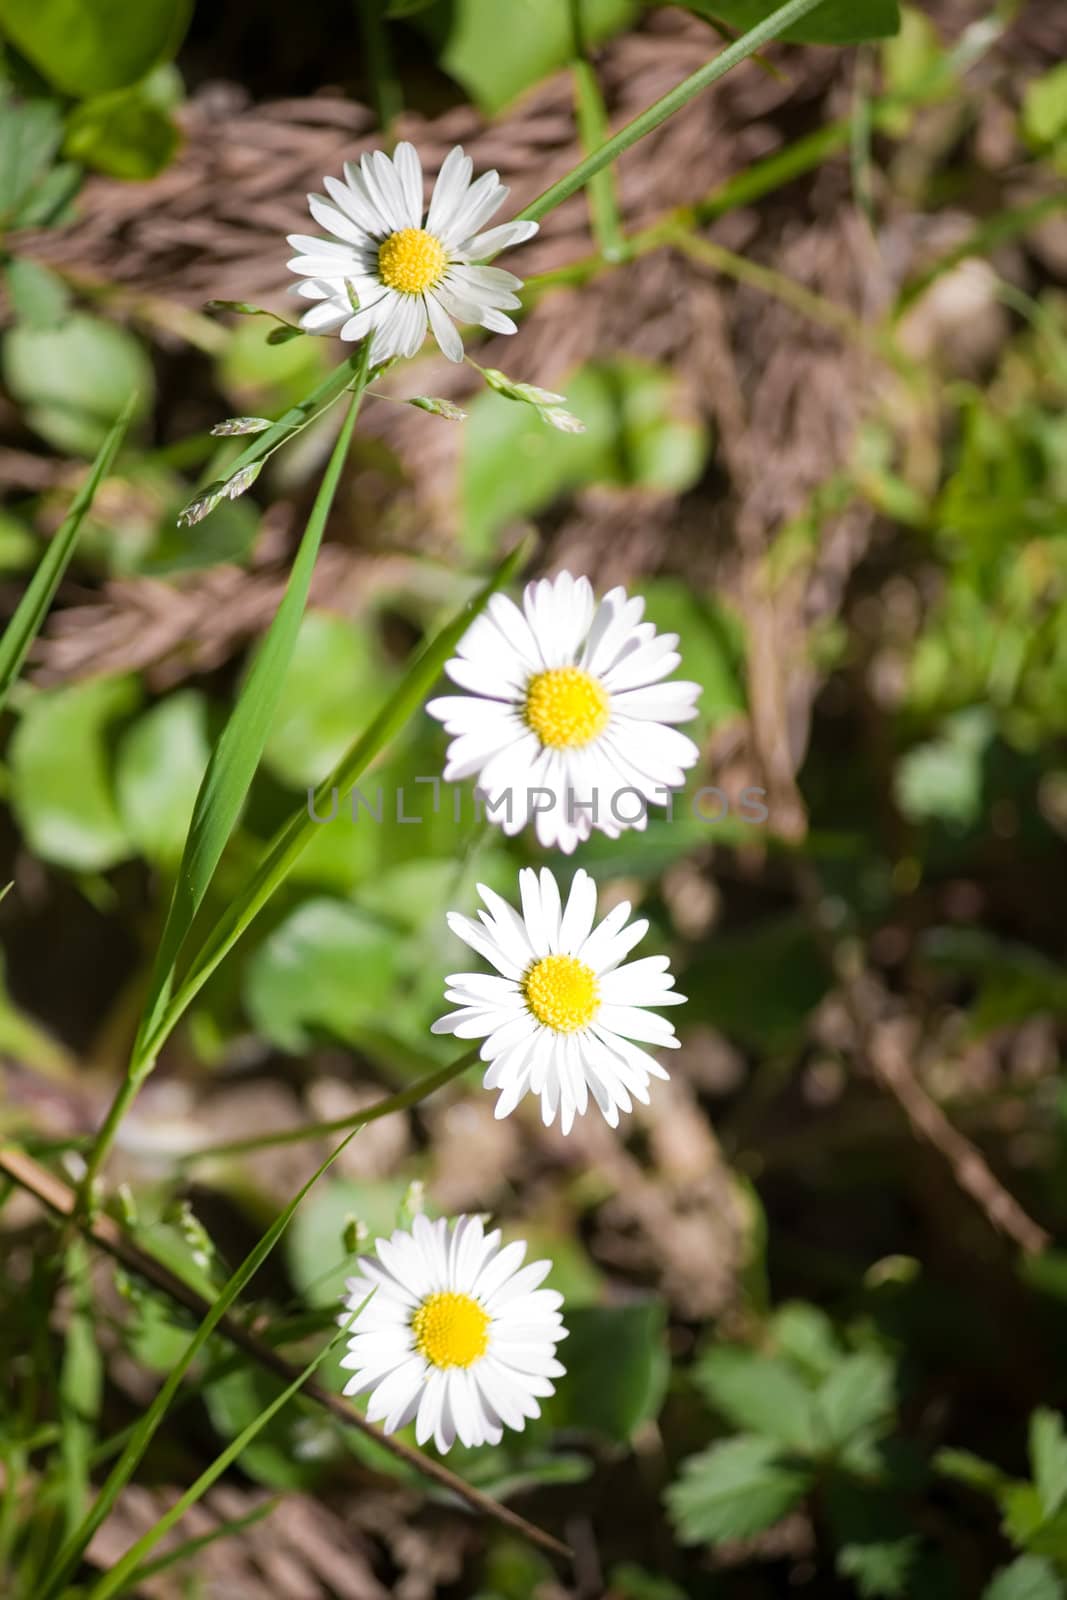 daisies by nubephoto